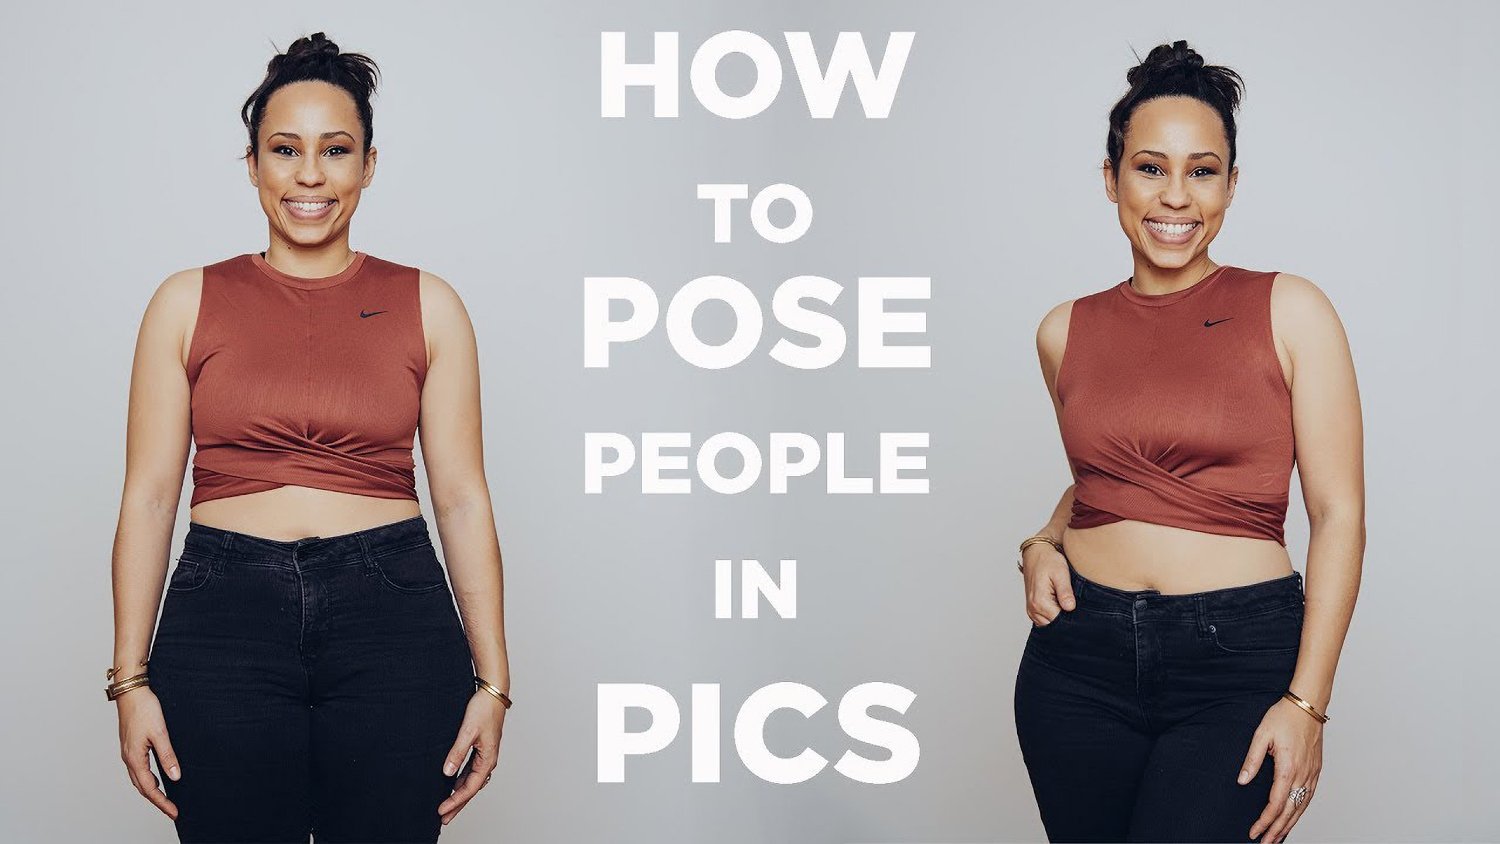 How to Pose People in Photos So They Look Lean and Tall